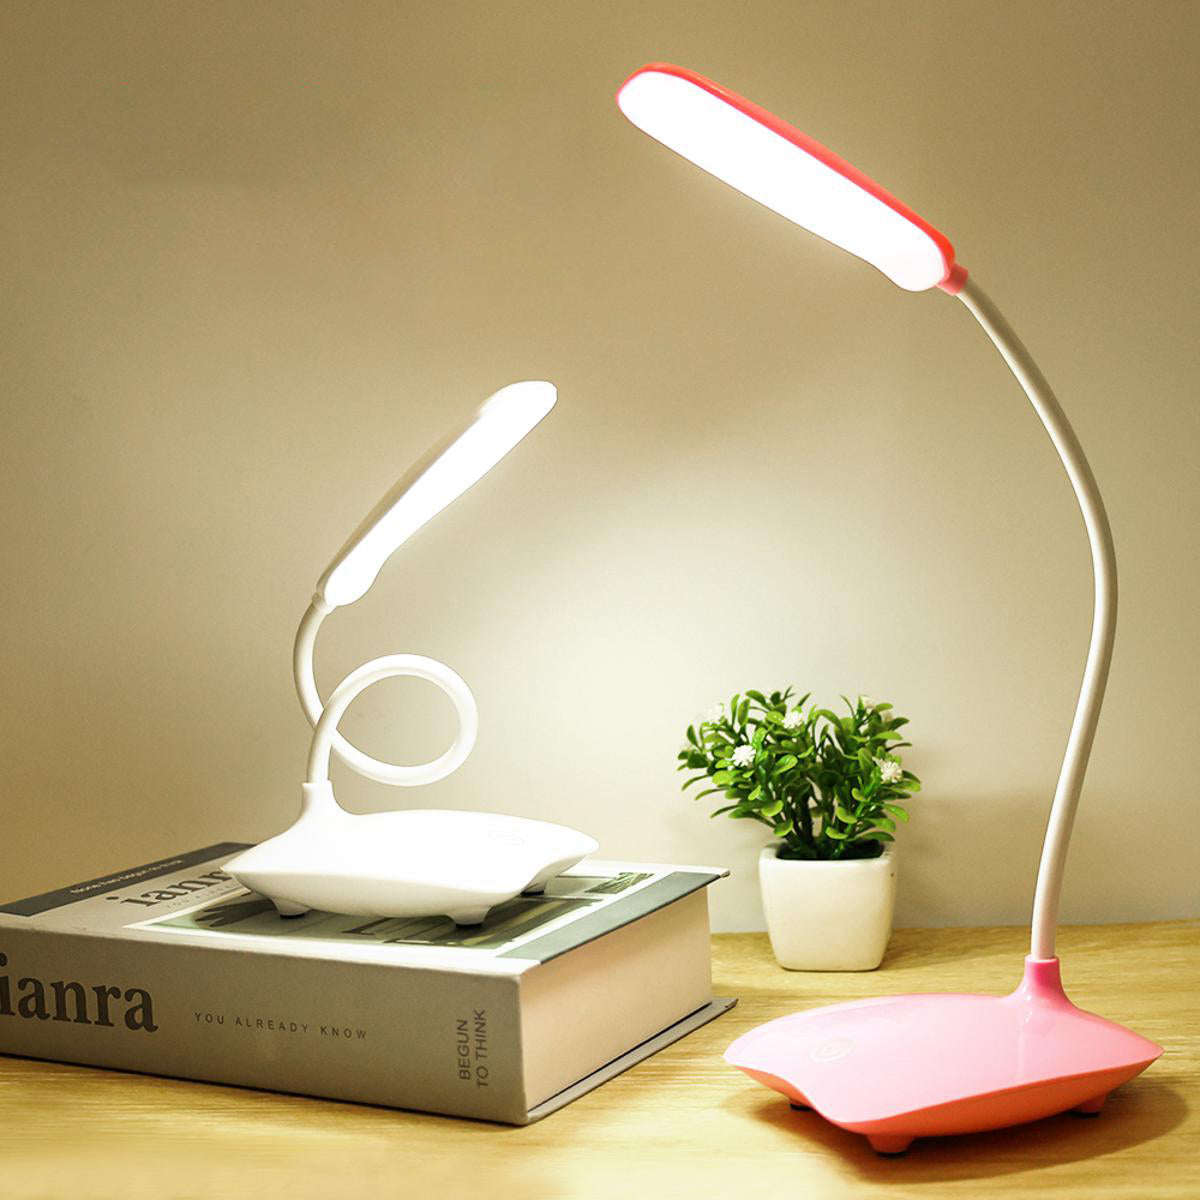 How To Prevent Eye Strain With The Use Of LED Reading Lamps?